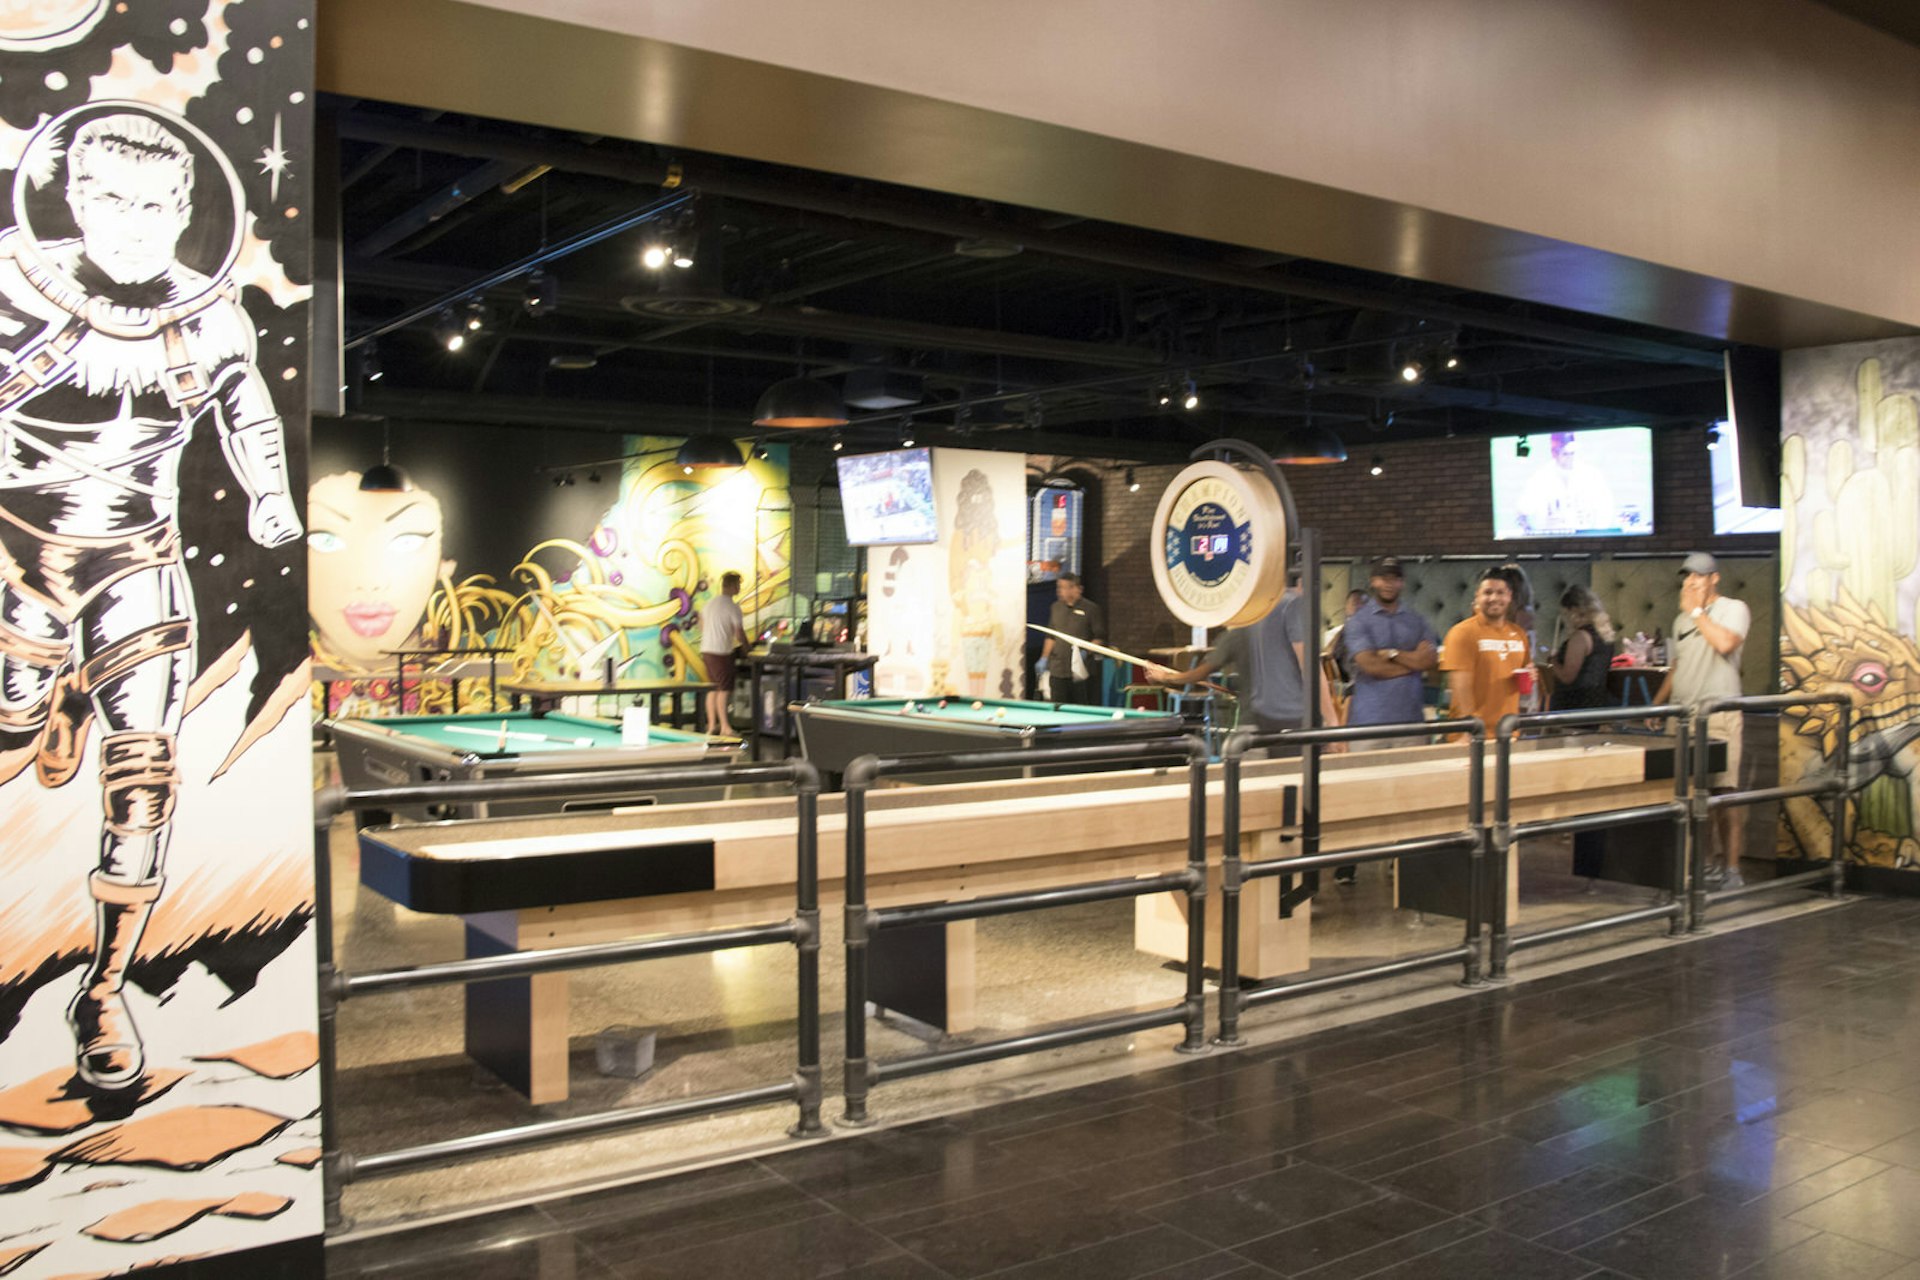 A row of shuffleboard tables enclose a gaming area, with pool tables in the background © Greg Thilmont / Lonely Planet